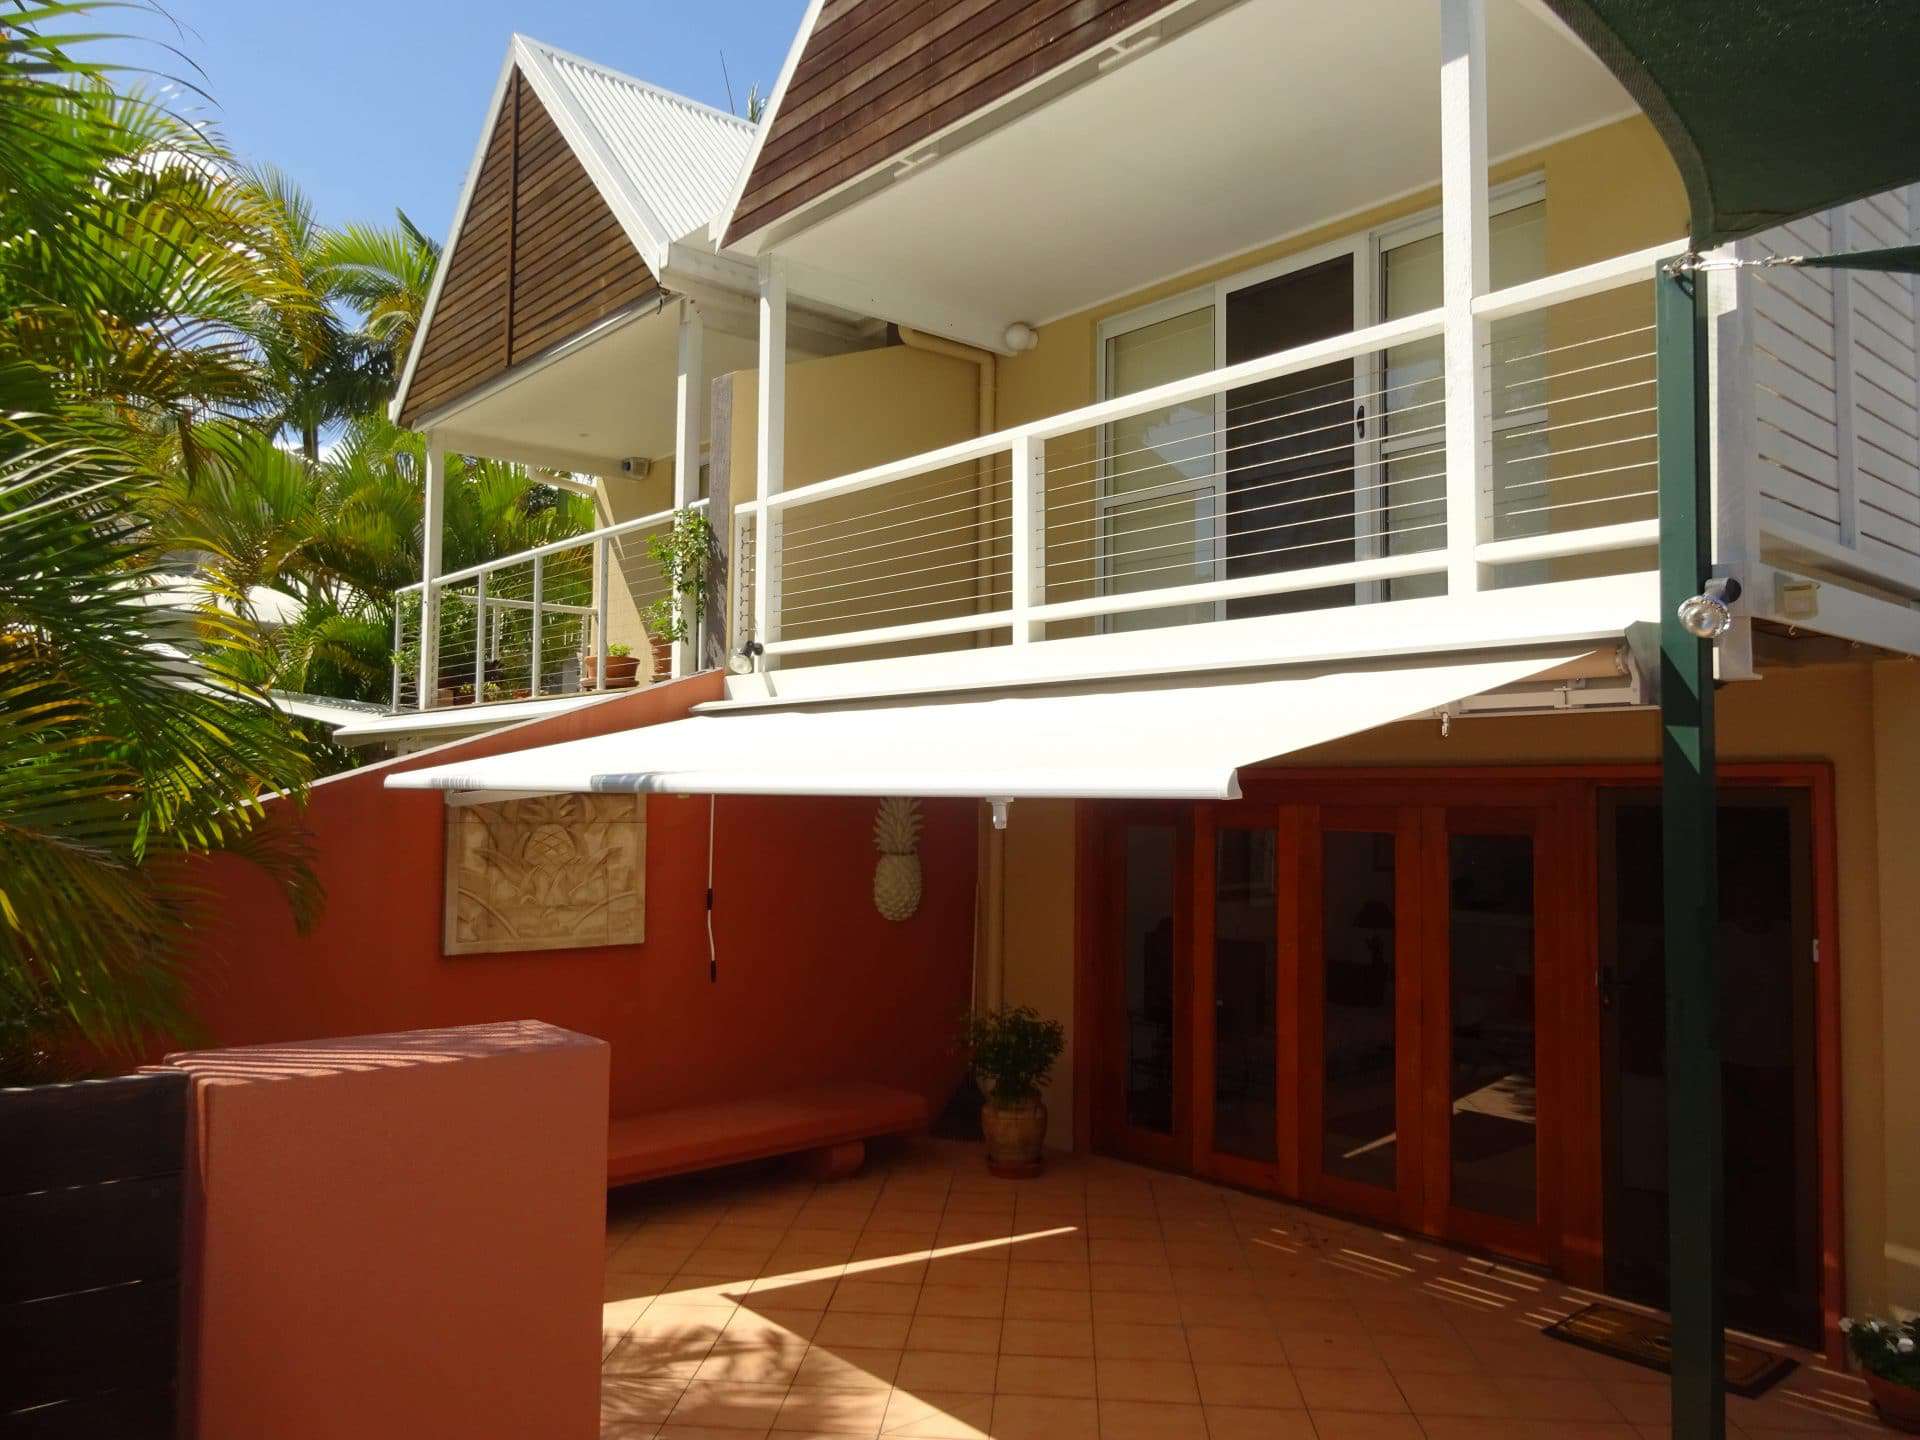 Folding Arm Awnings above patio area with balcony above